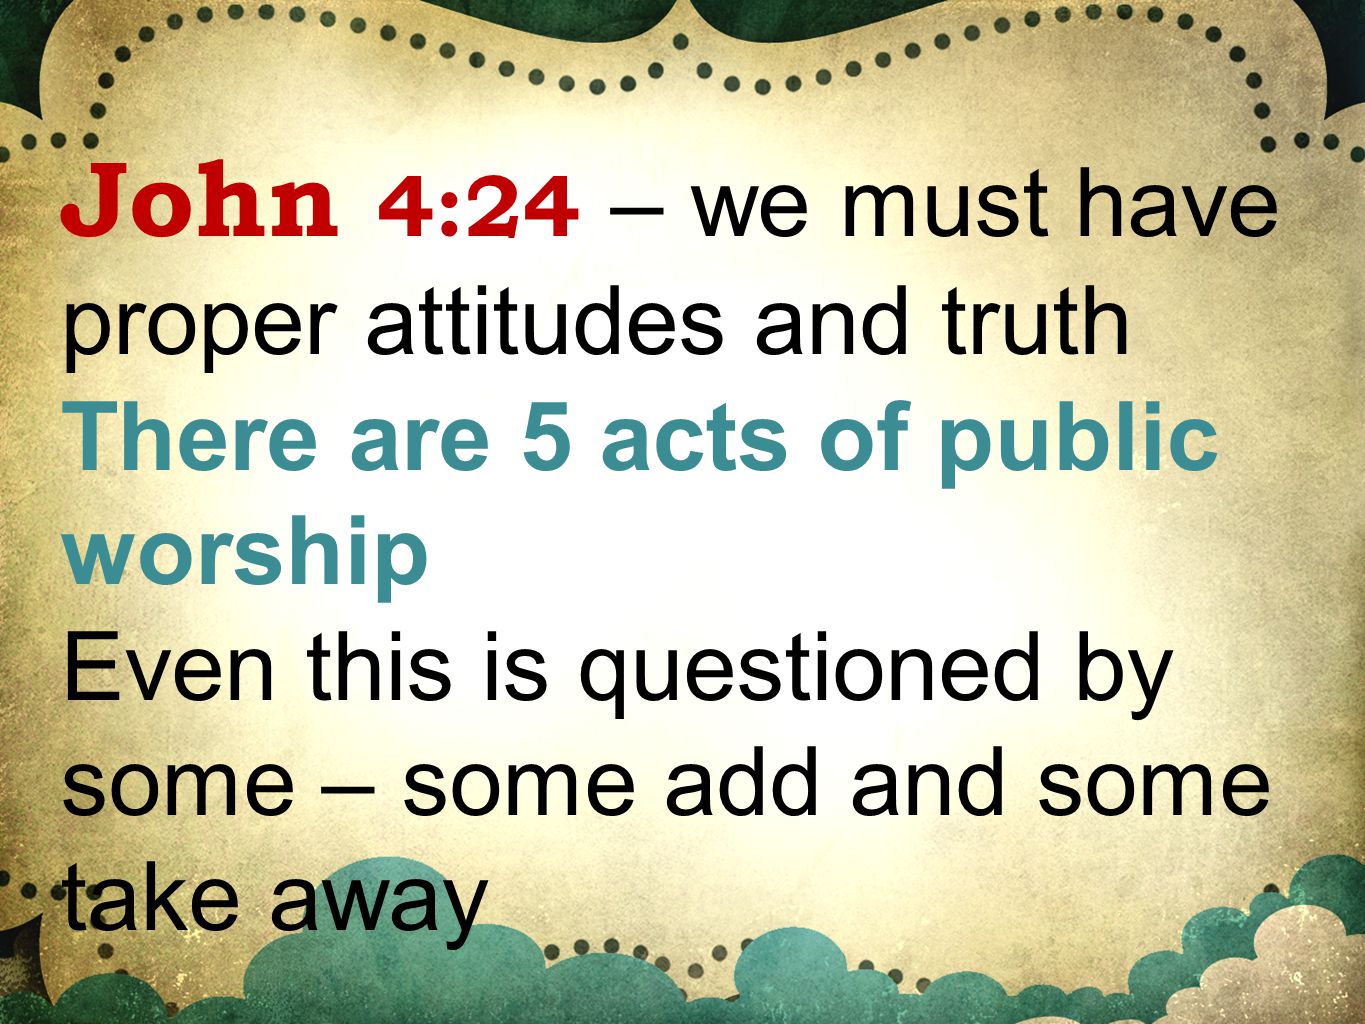 John 4:24 – we must have proper attitudes and truth There are 5 acts of public worship Even this is questioned by some – some add and some take away